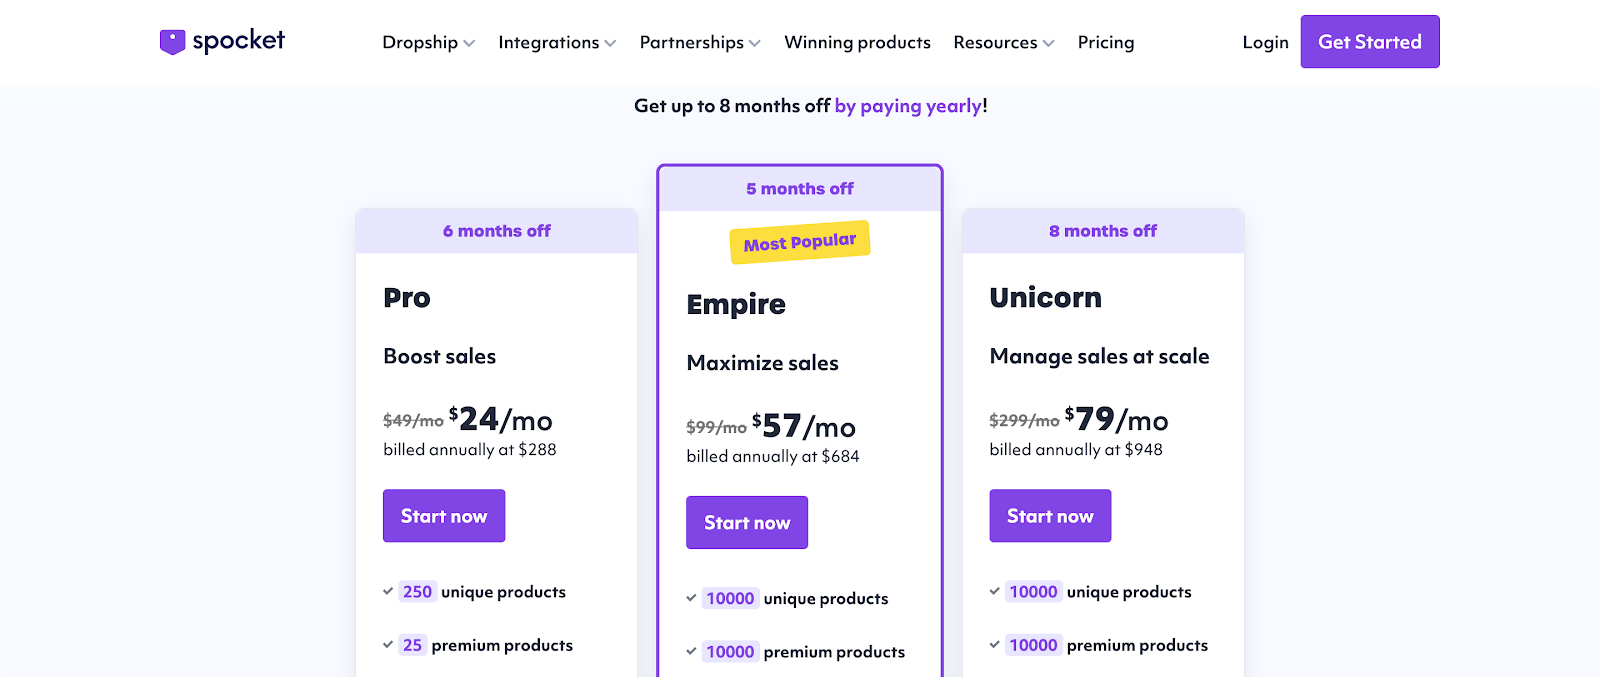 Cost And Price Plans Of Spocket For Dropshipping Business